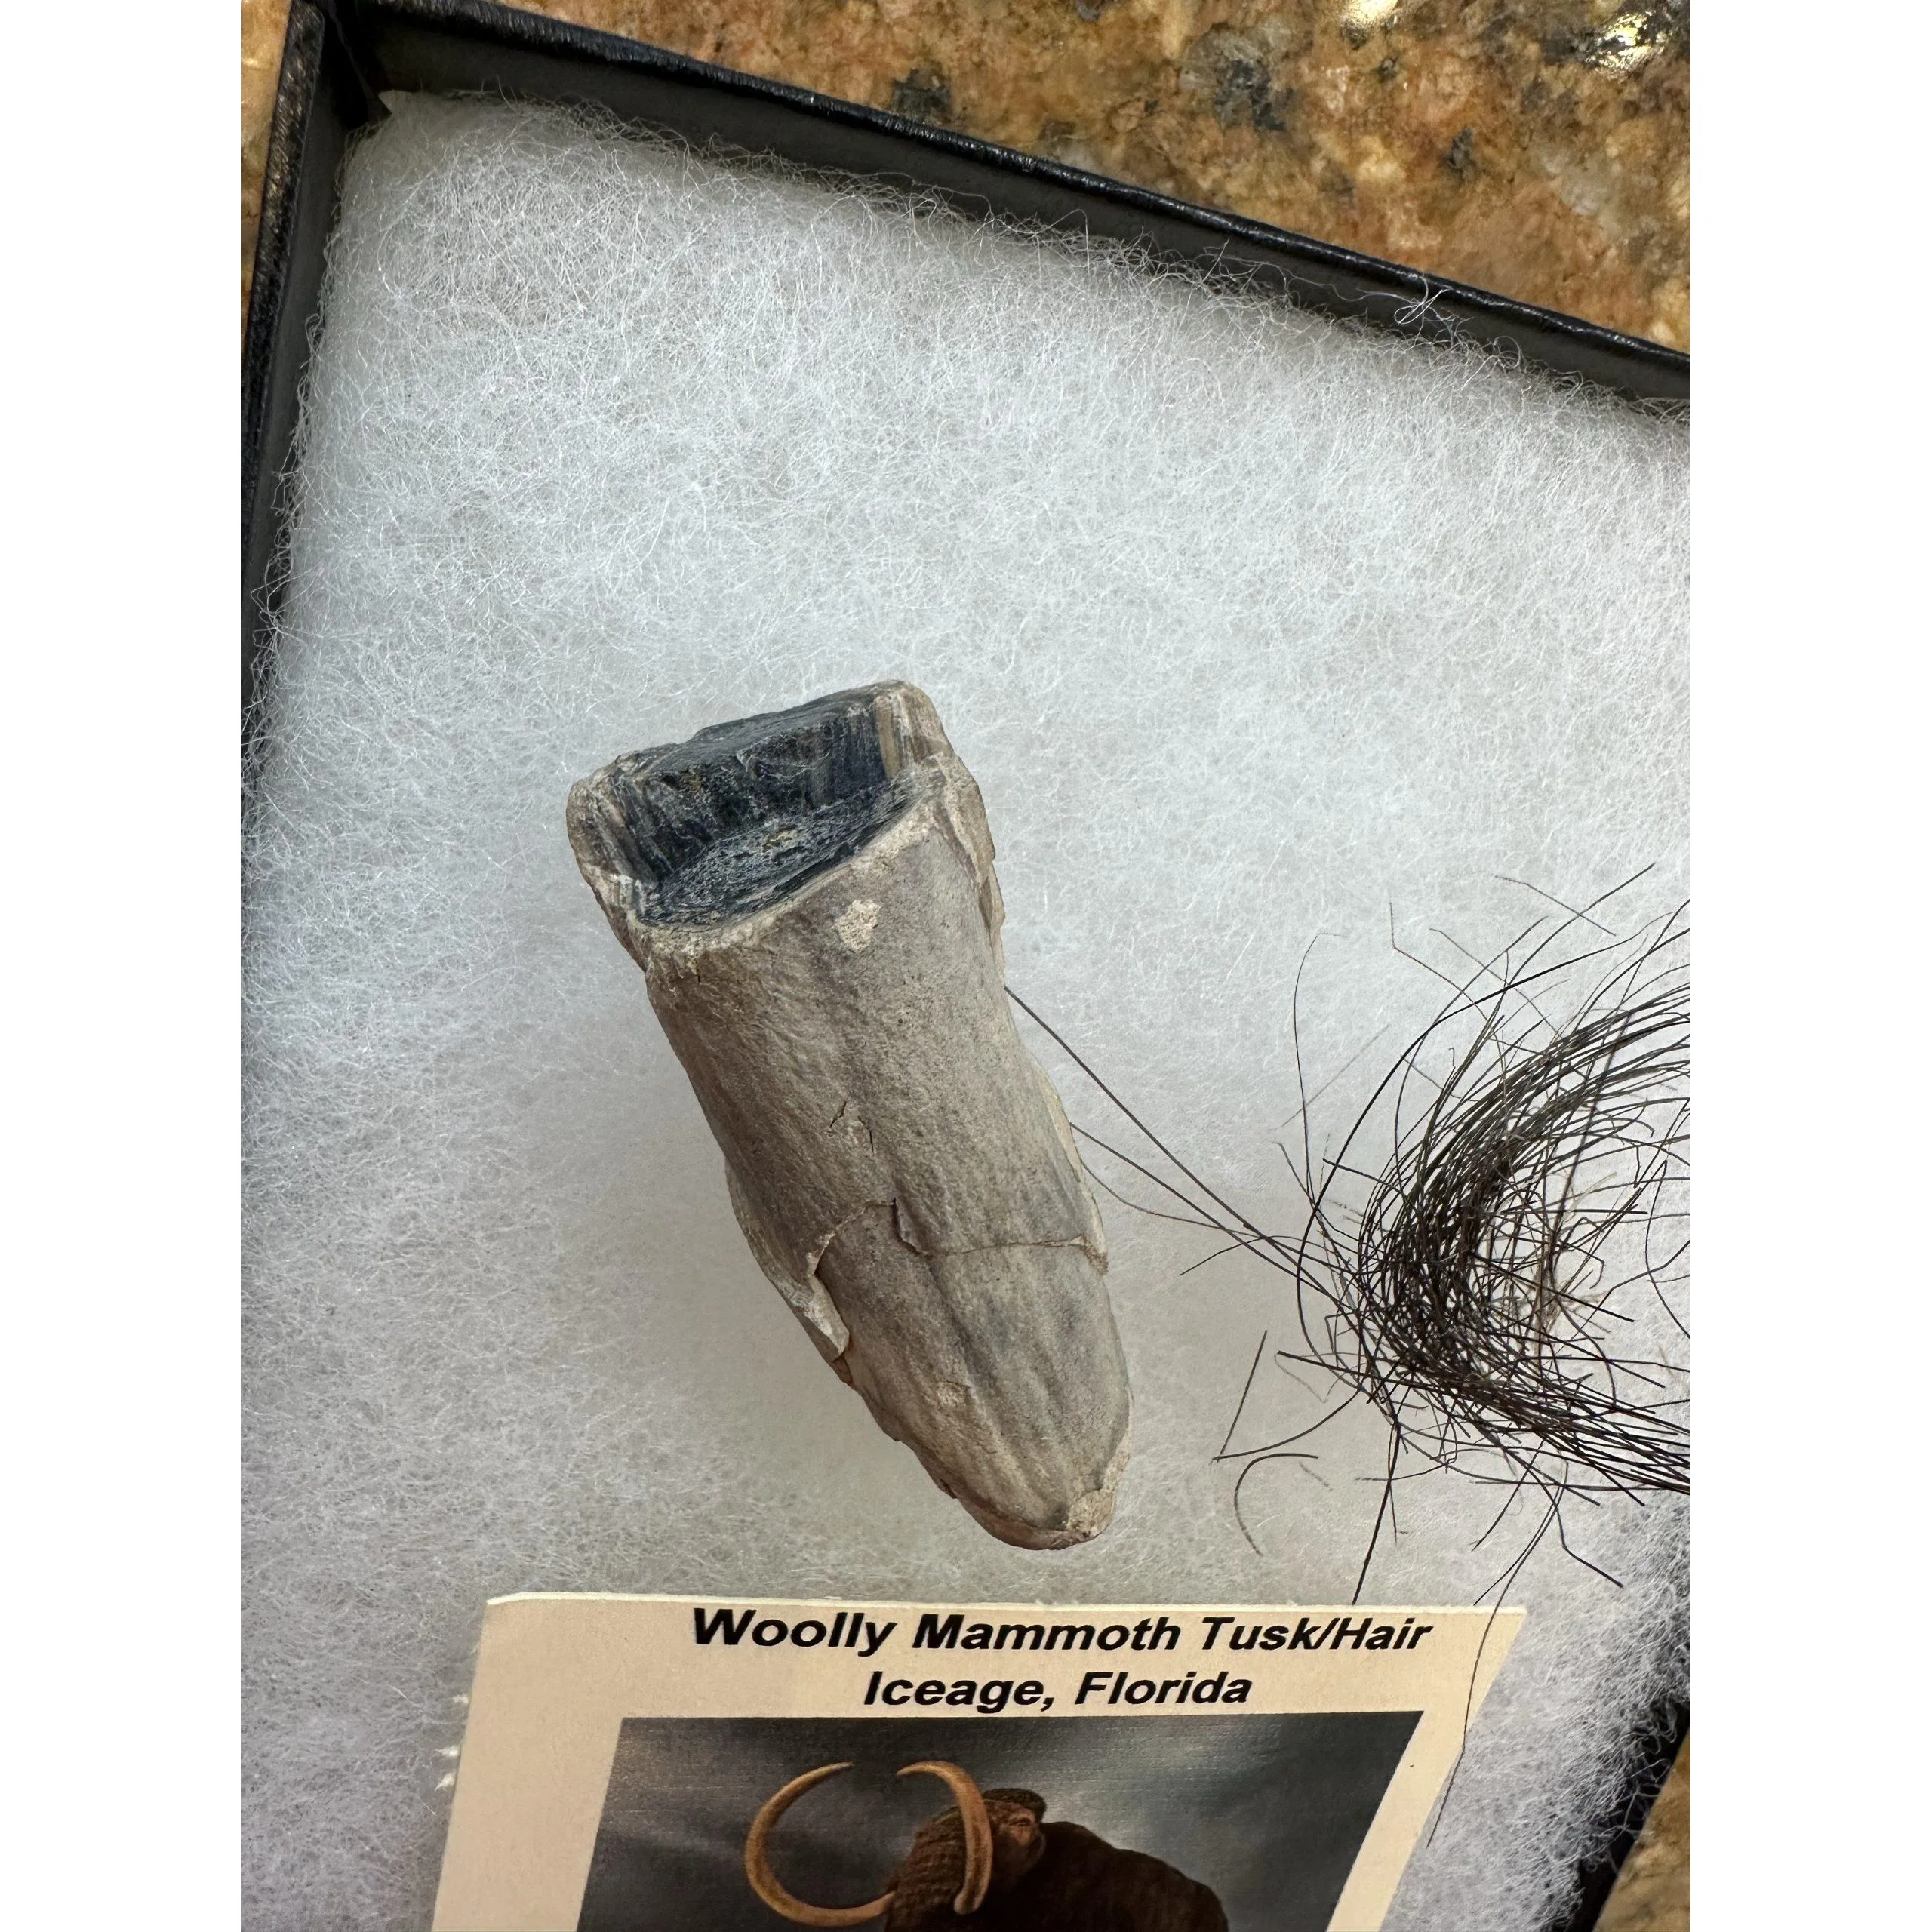 Mammoth Hair/ Baby Tusk in collector box Prehistoric Online